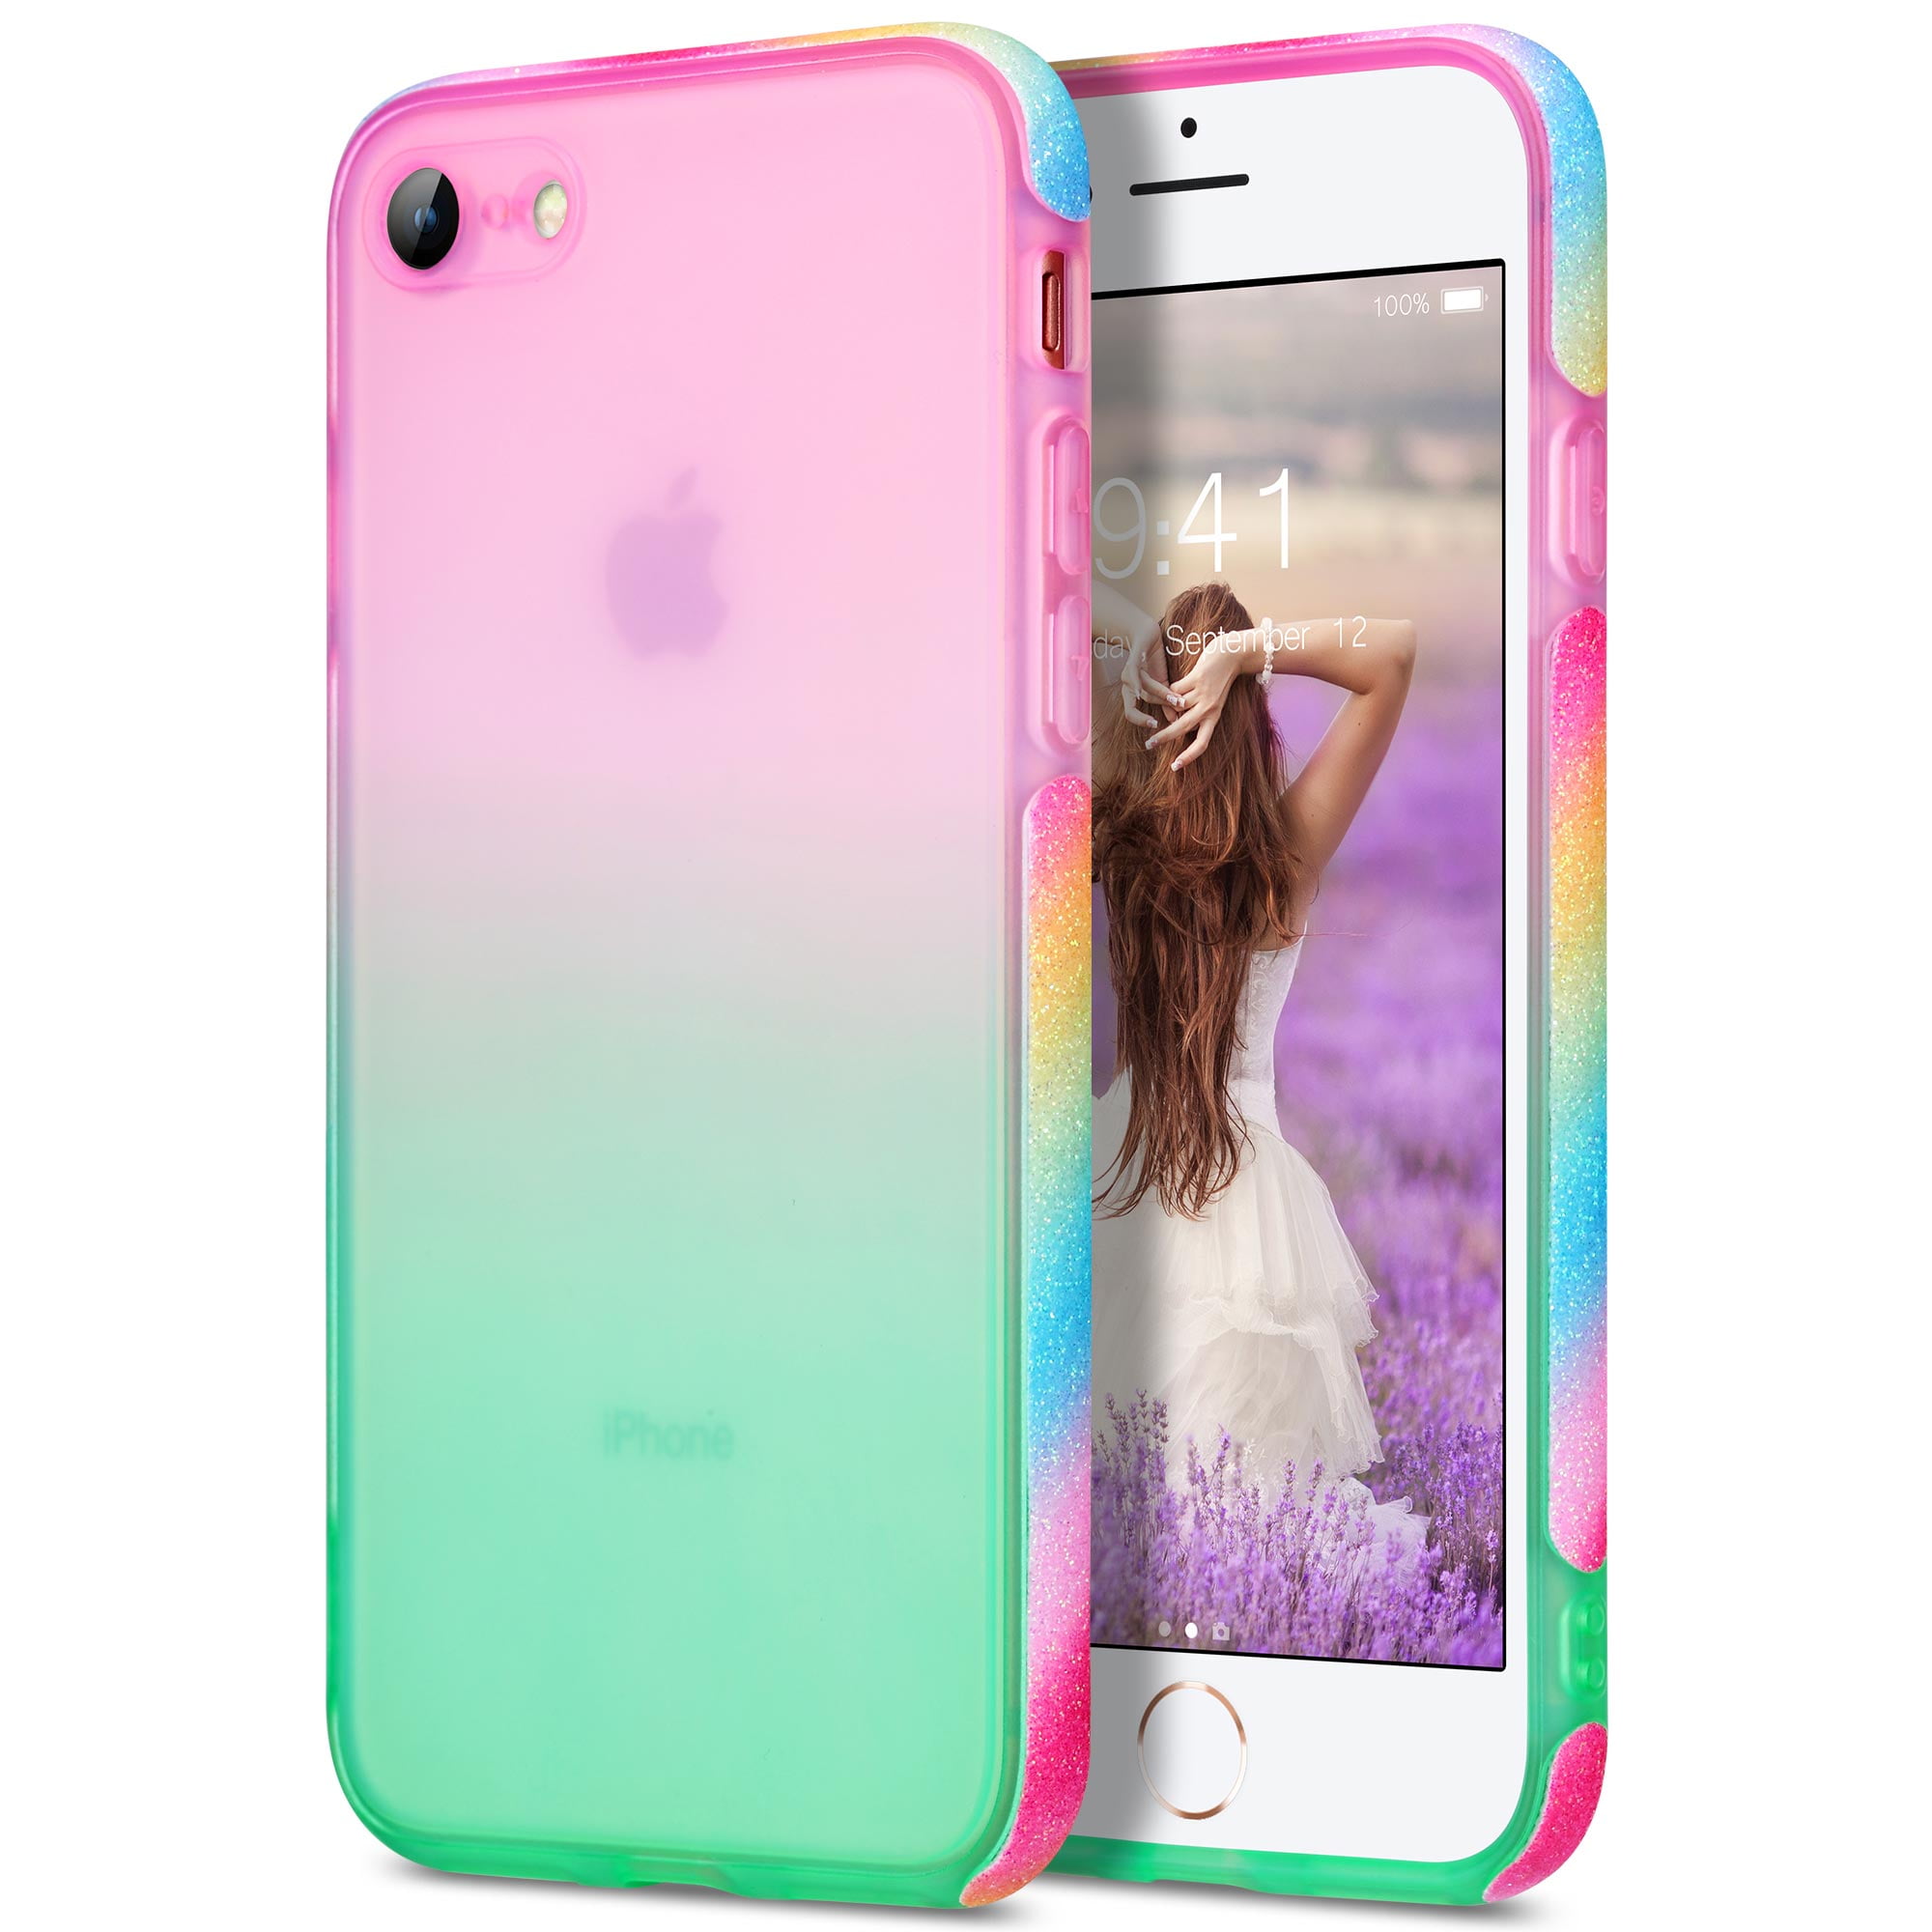 Ulak Iphone 8 Iphone 7 Iphone Se 22 Case For Girls Stylish Bling Anti Scratch Protective Phone Case For Iphone 7 8 Se 3rd 2nd Generation Pink Green Walmart Com